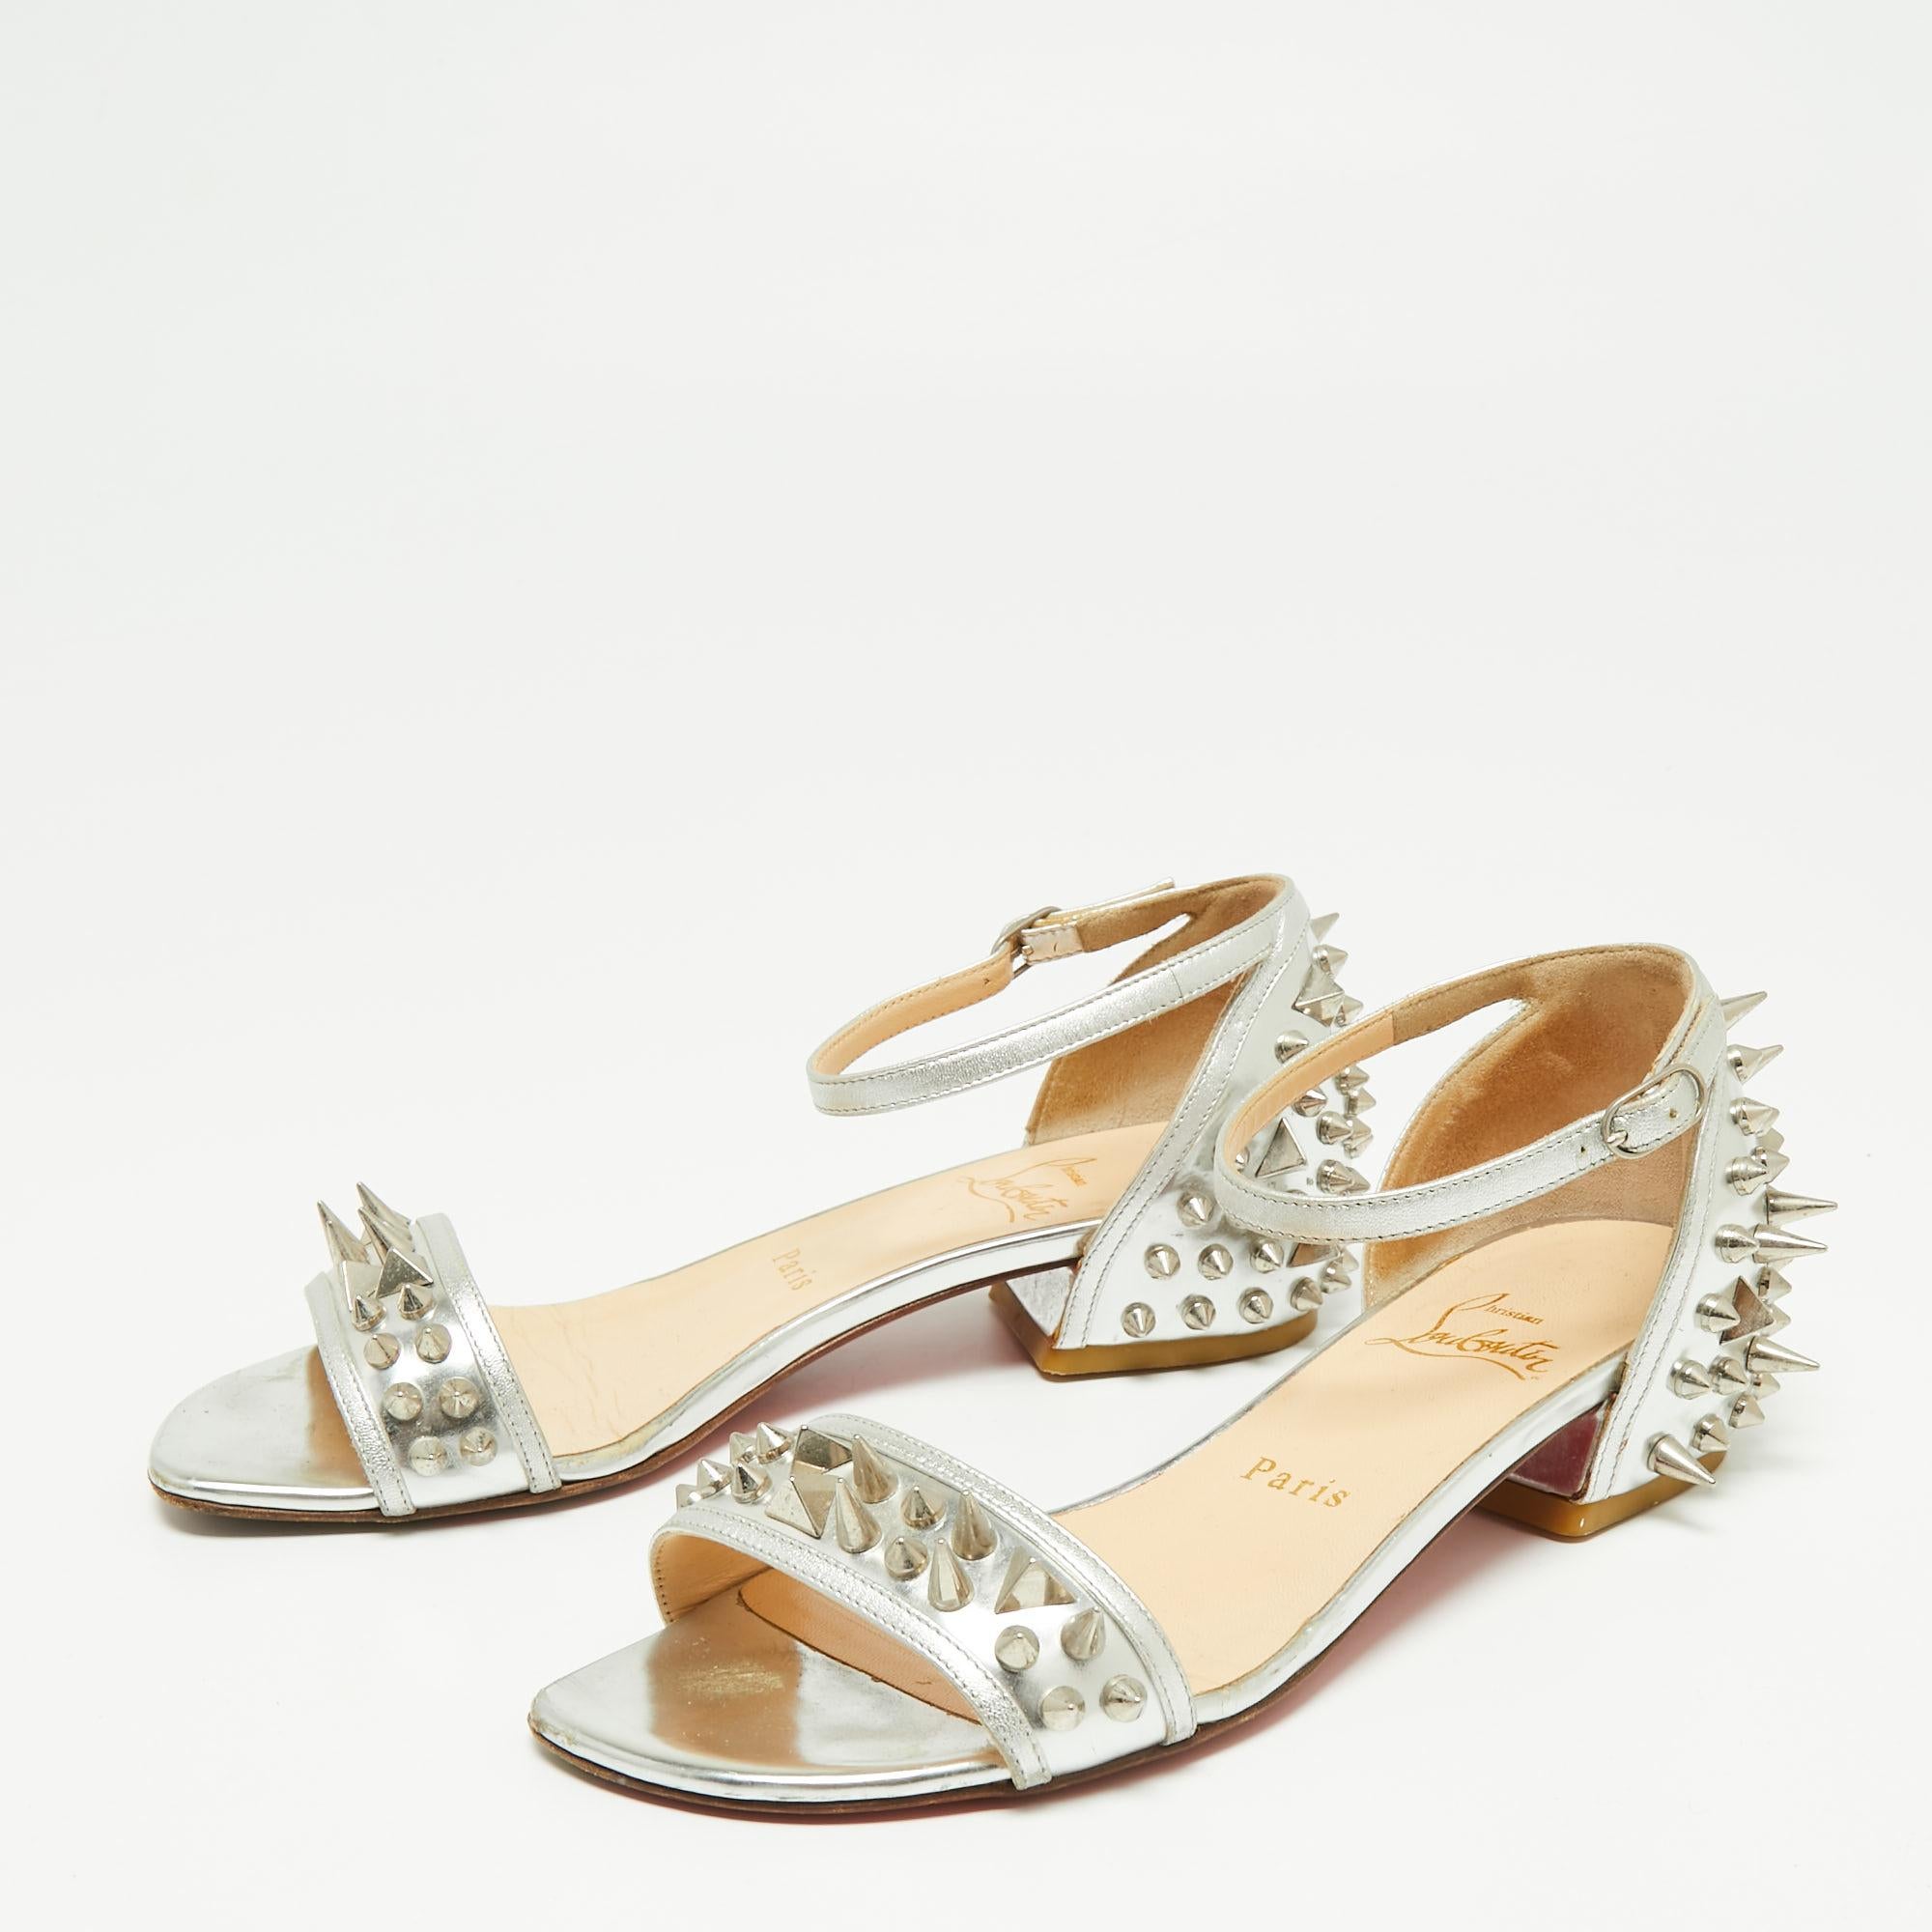 Christian Louboutin Silver Leather Studded Druide Ankle-Strap Sandals Size 35.5 For Sale 5